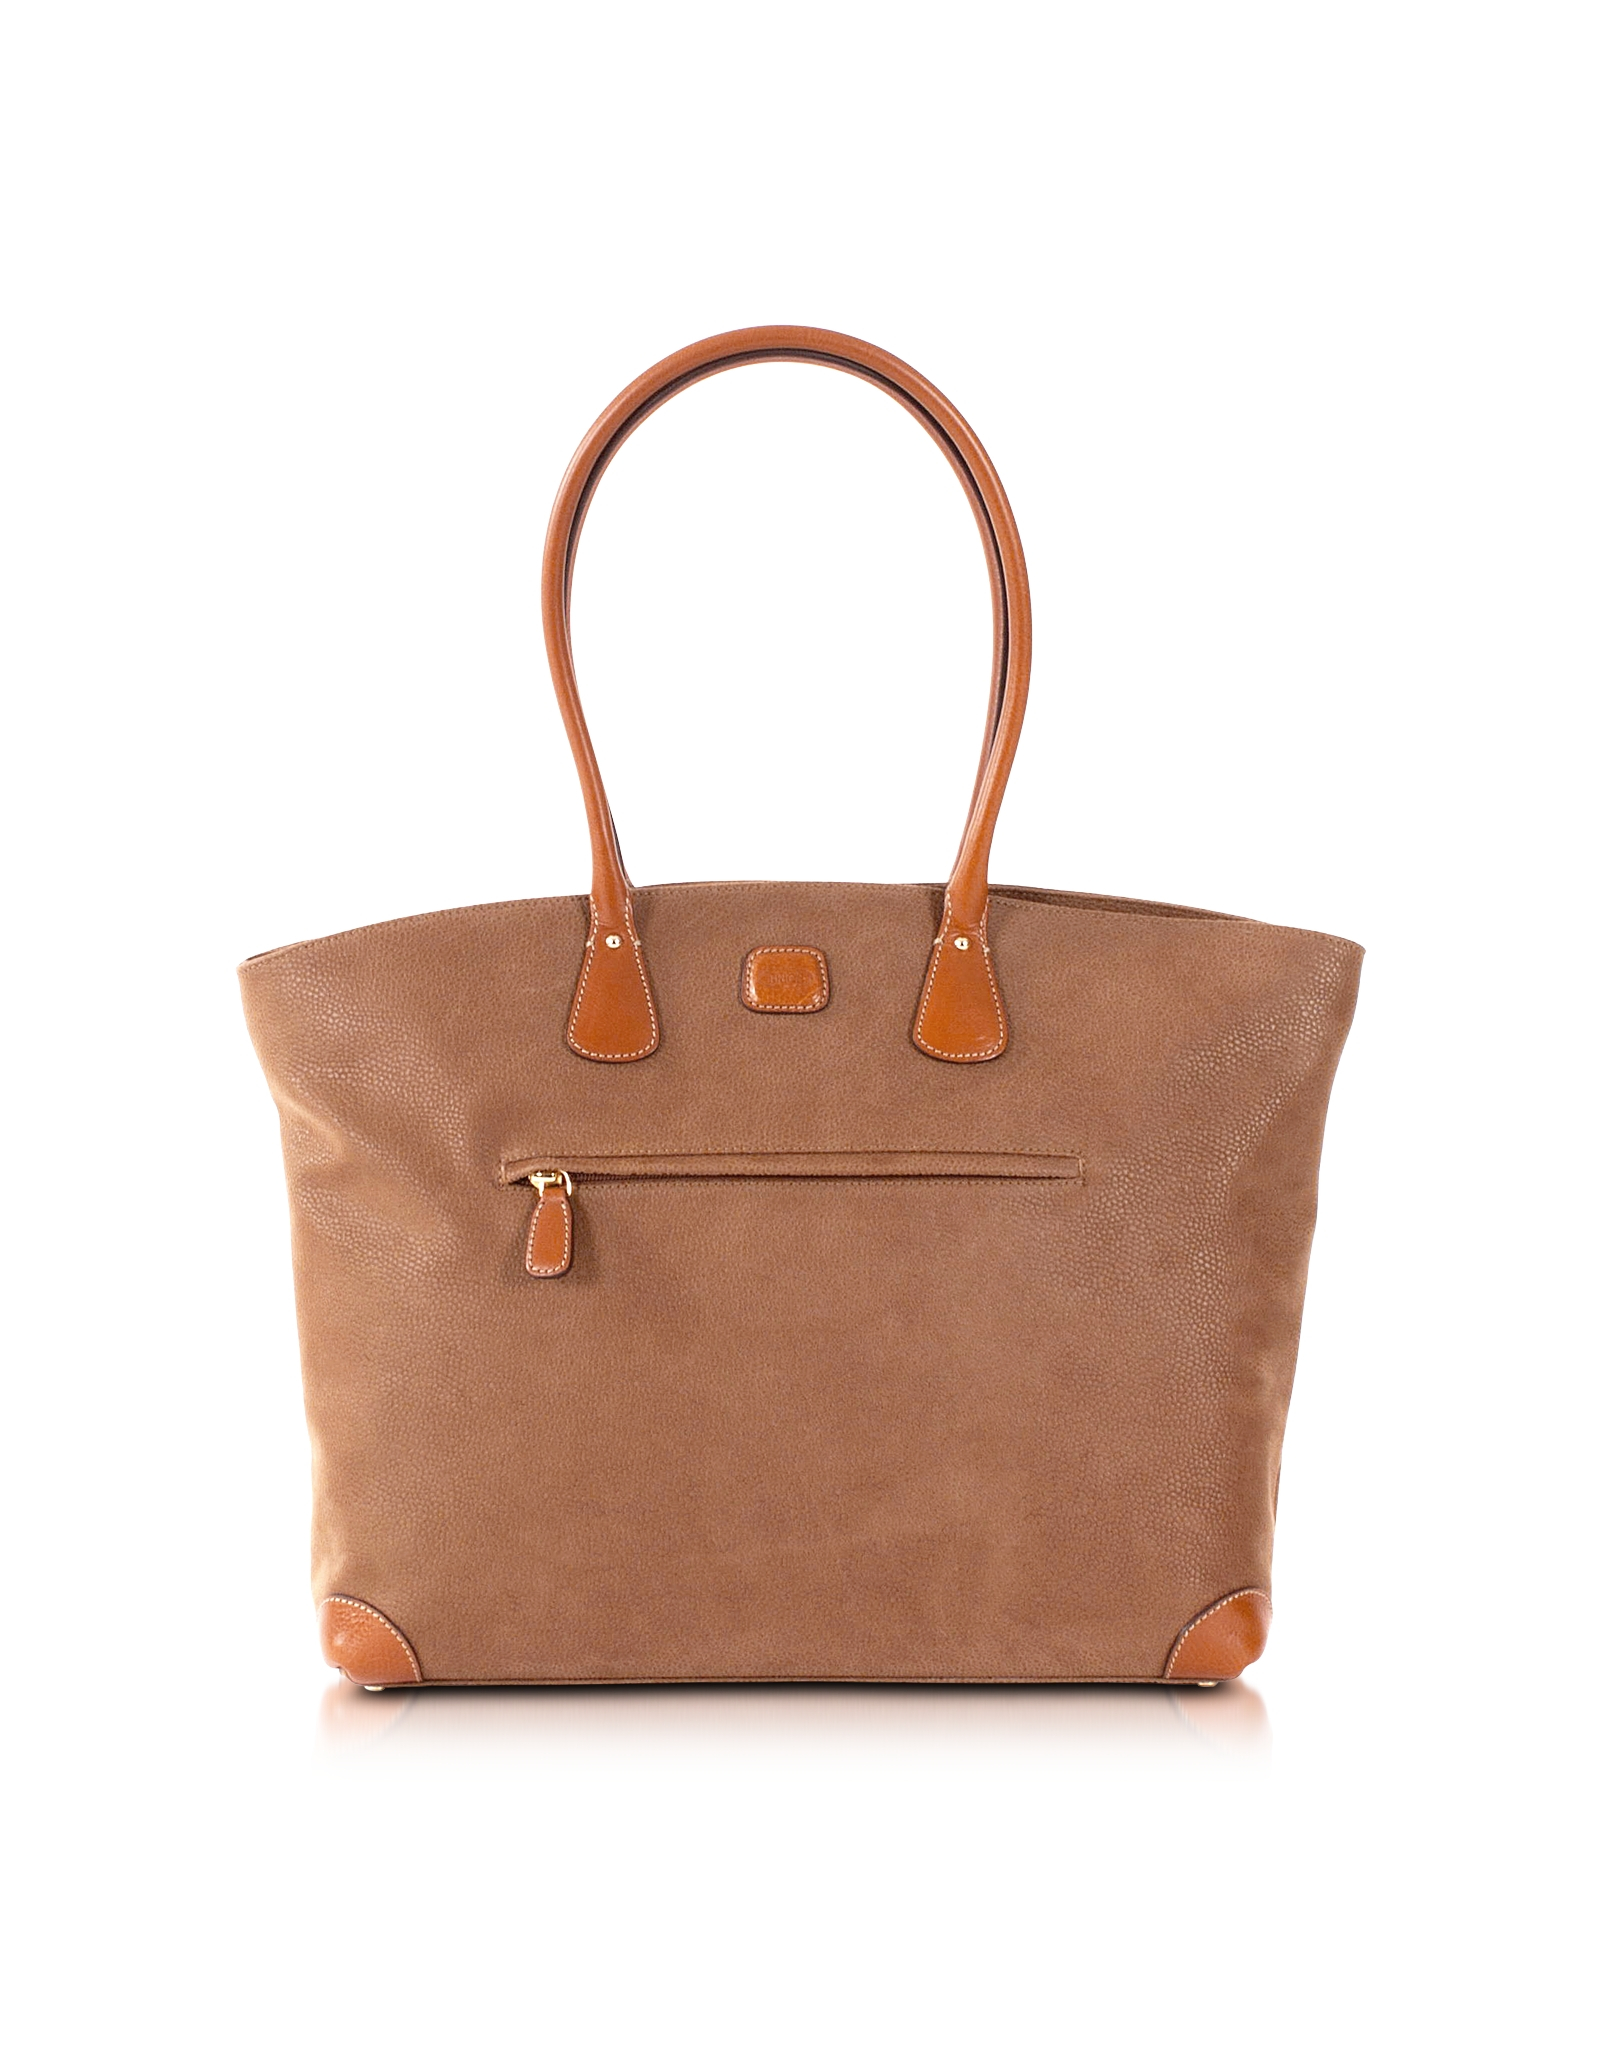 Lyst - Bric's Life - Large Camel Micro-suede Tote Bag in Natural